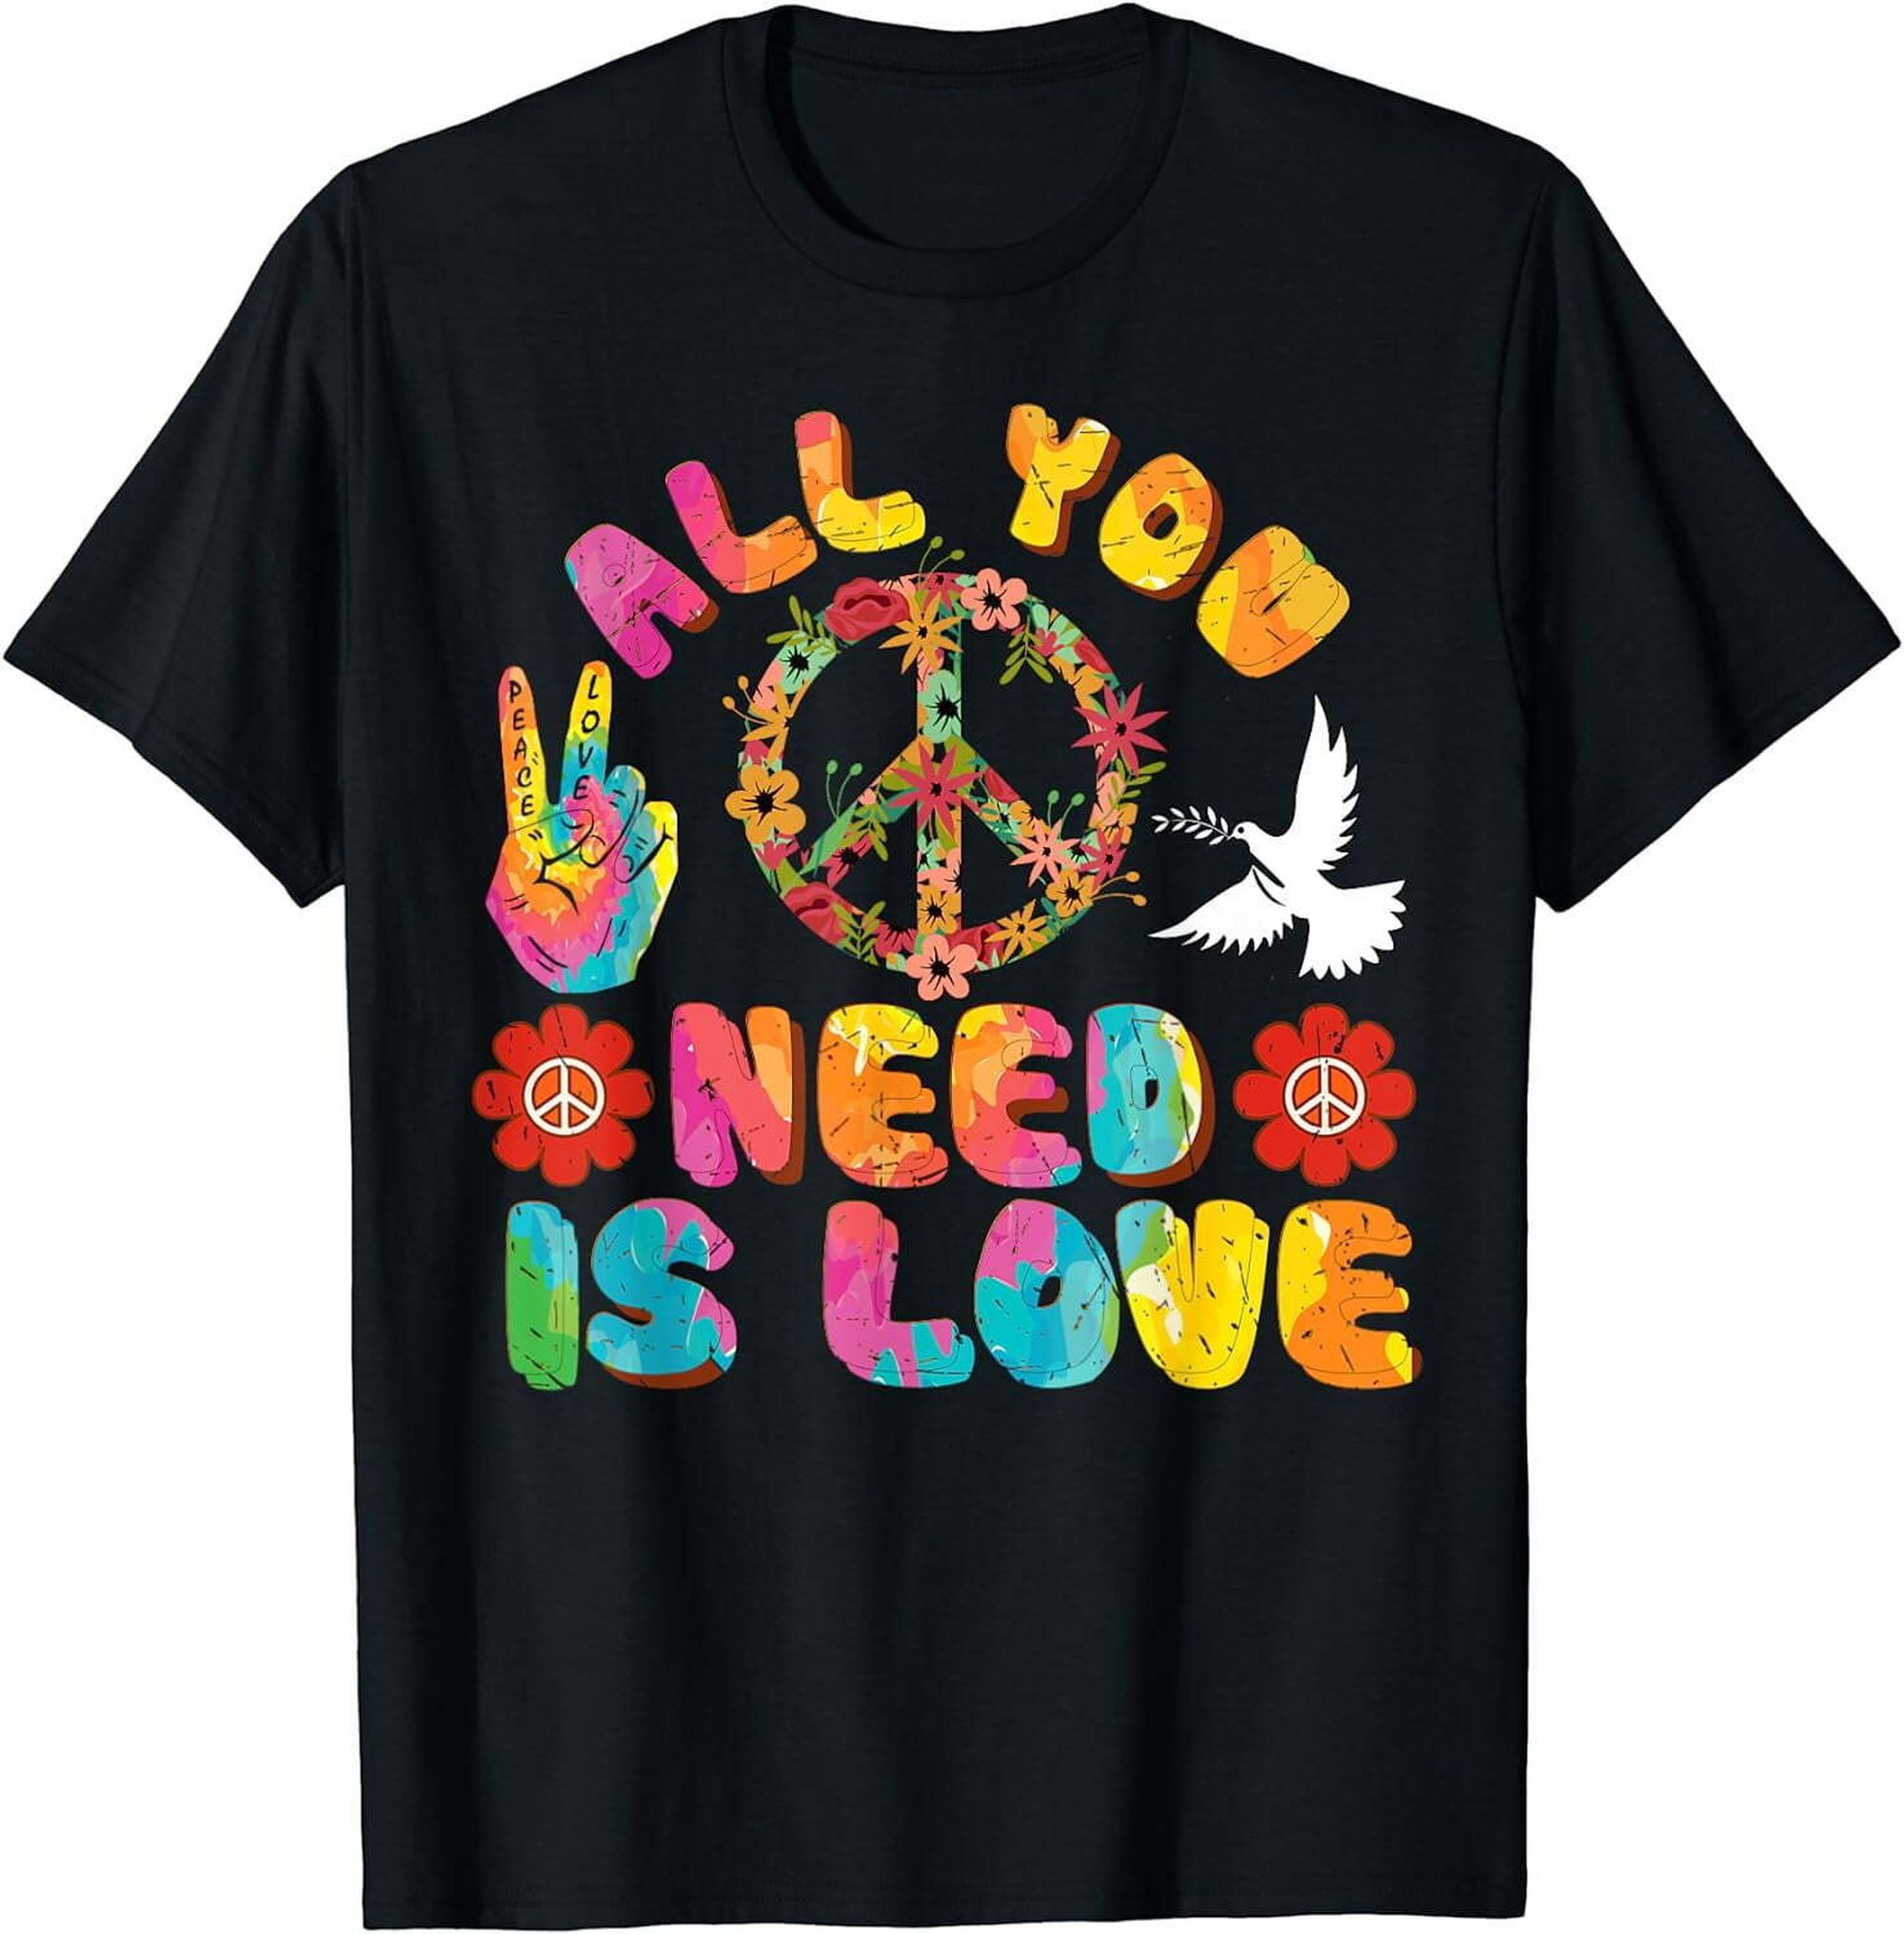 All You Need Is Love Tie Dye Peace Sign Shirts For Women 60s T-Shirt ...